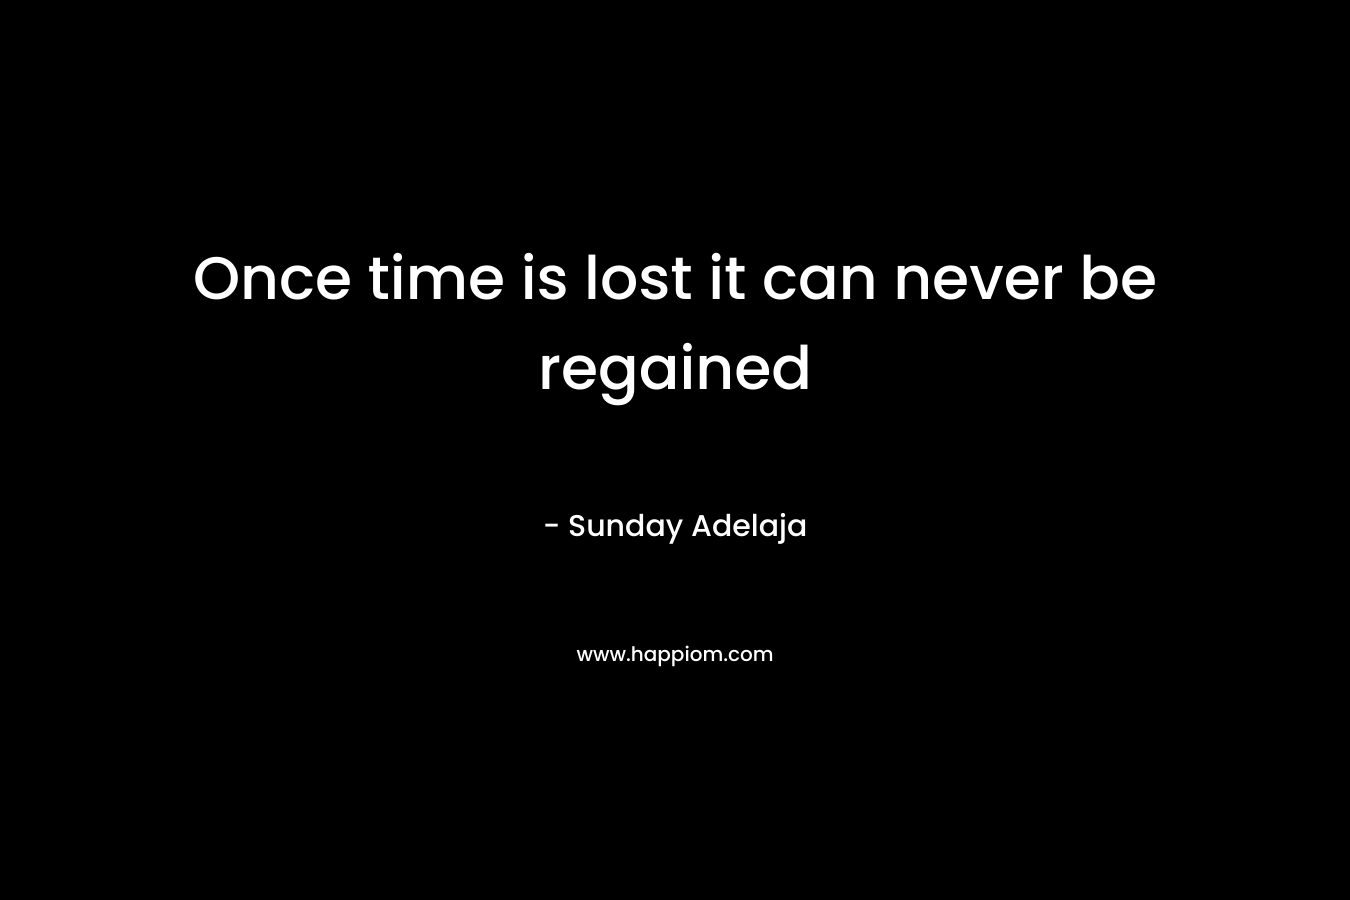 Once time is lost it can never be regained